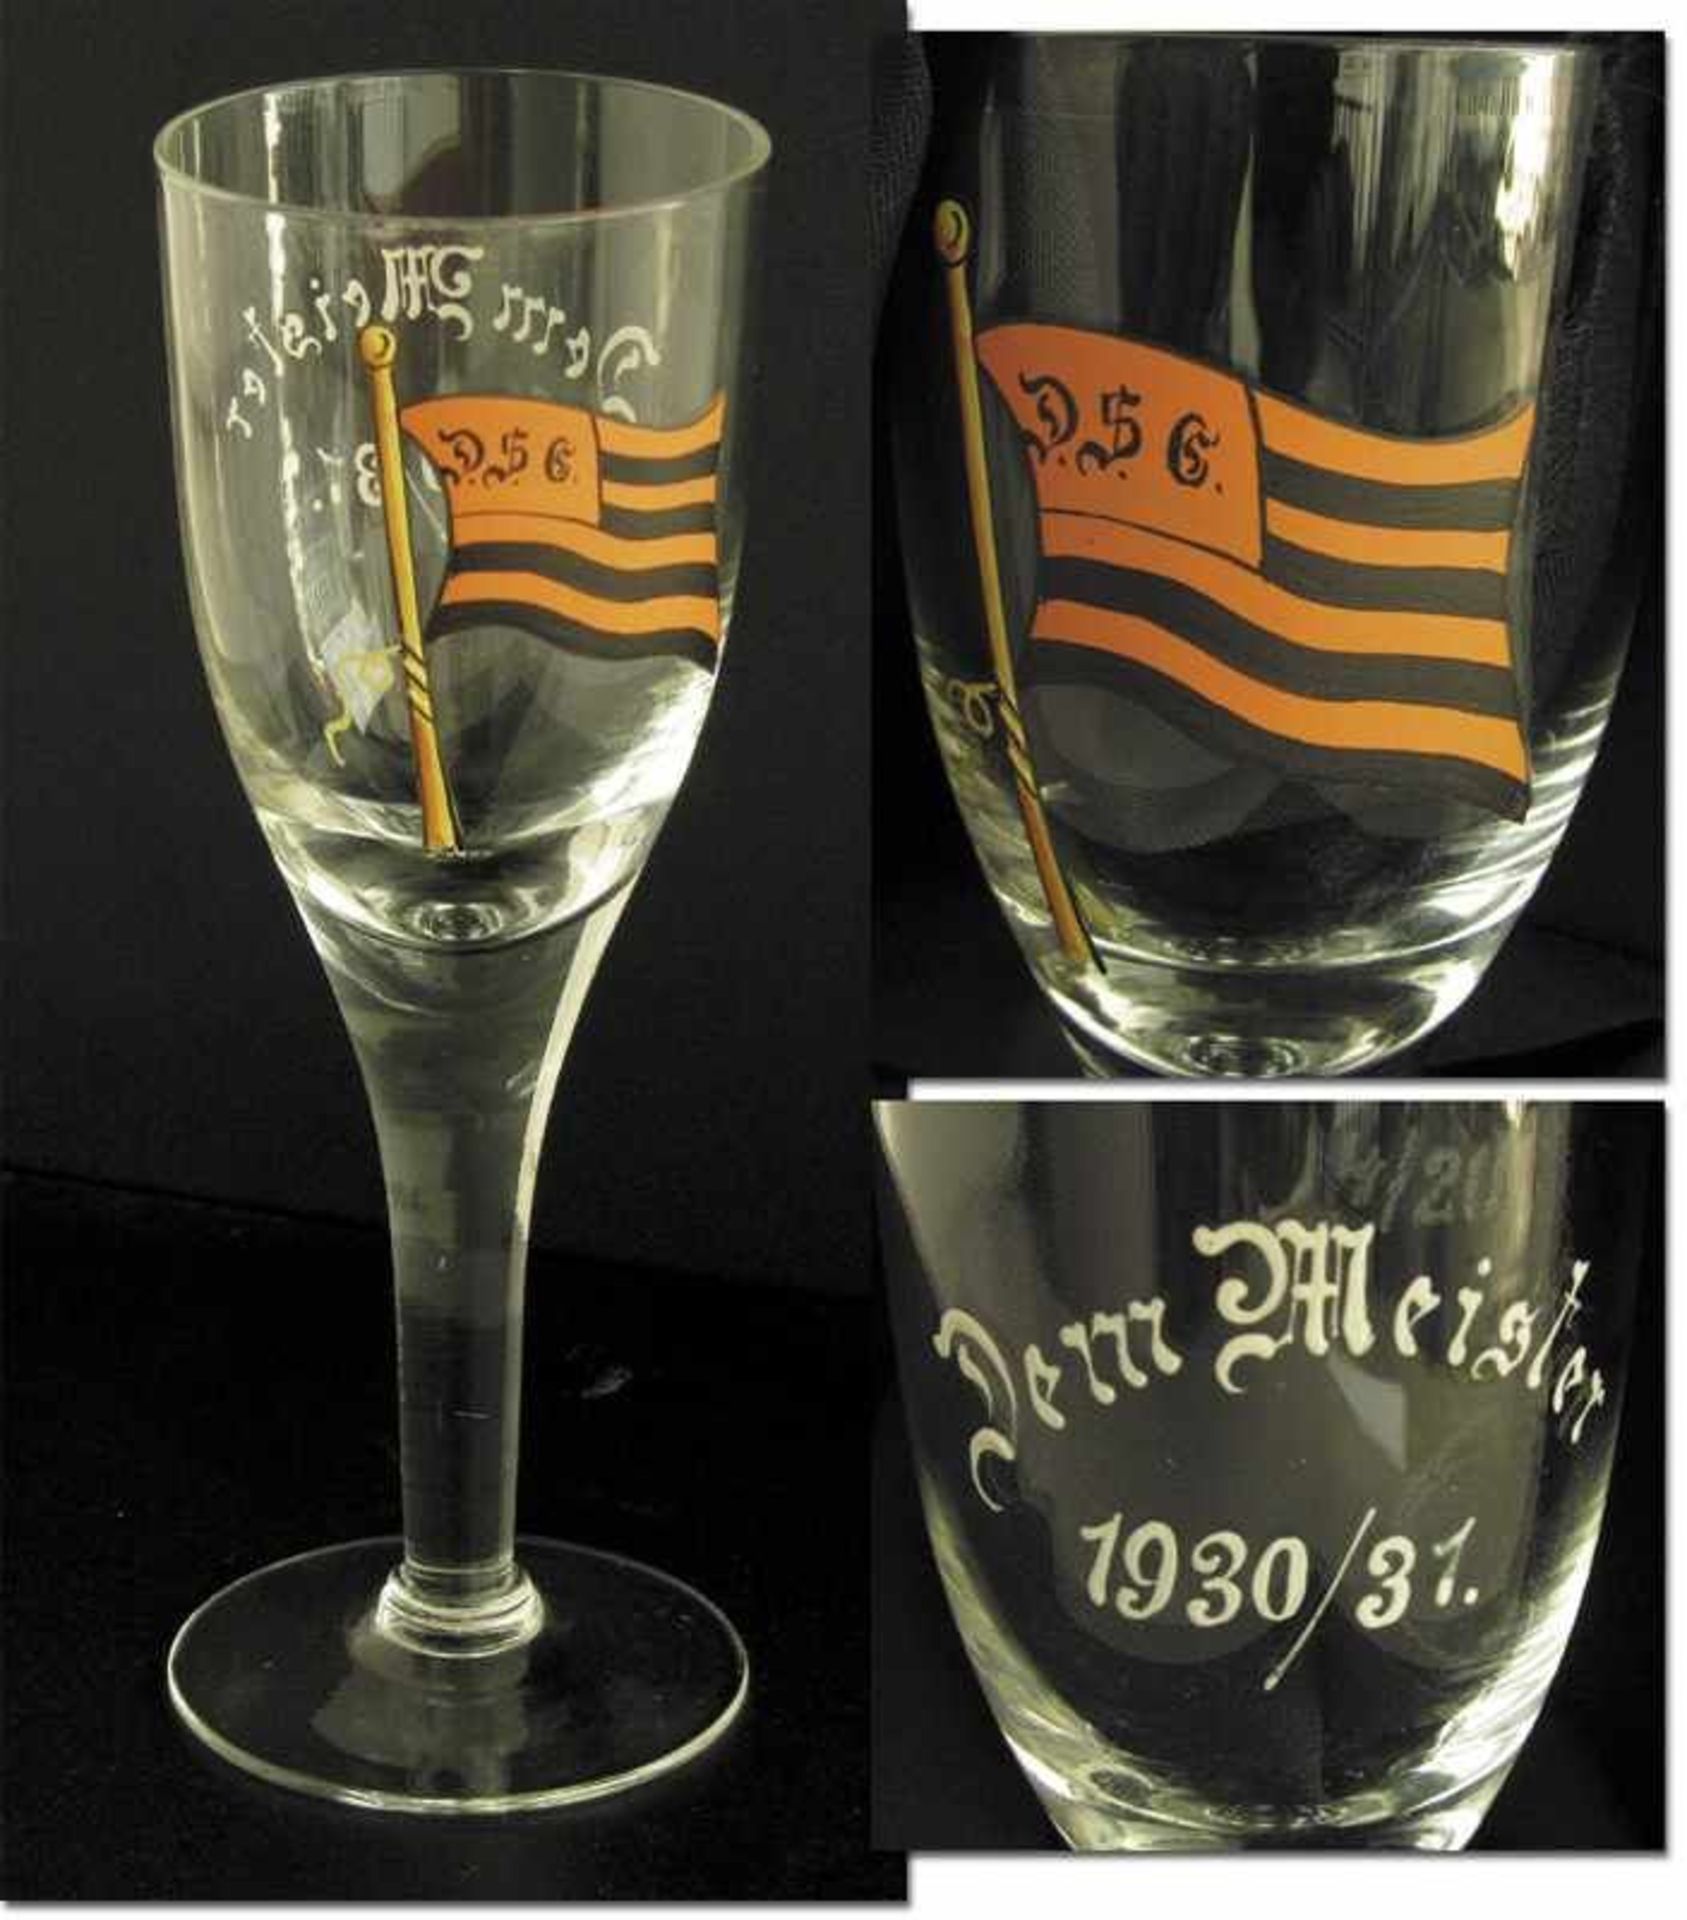 Dresdner SC Football ChampionsGlascup from 1931 - Large glass cup inscribed "Dem Meister 1930/31" (